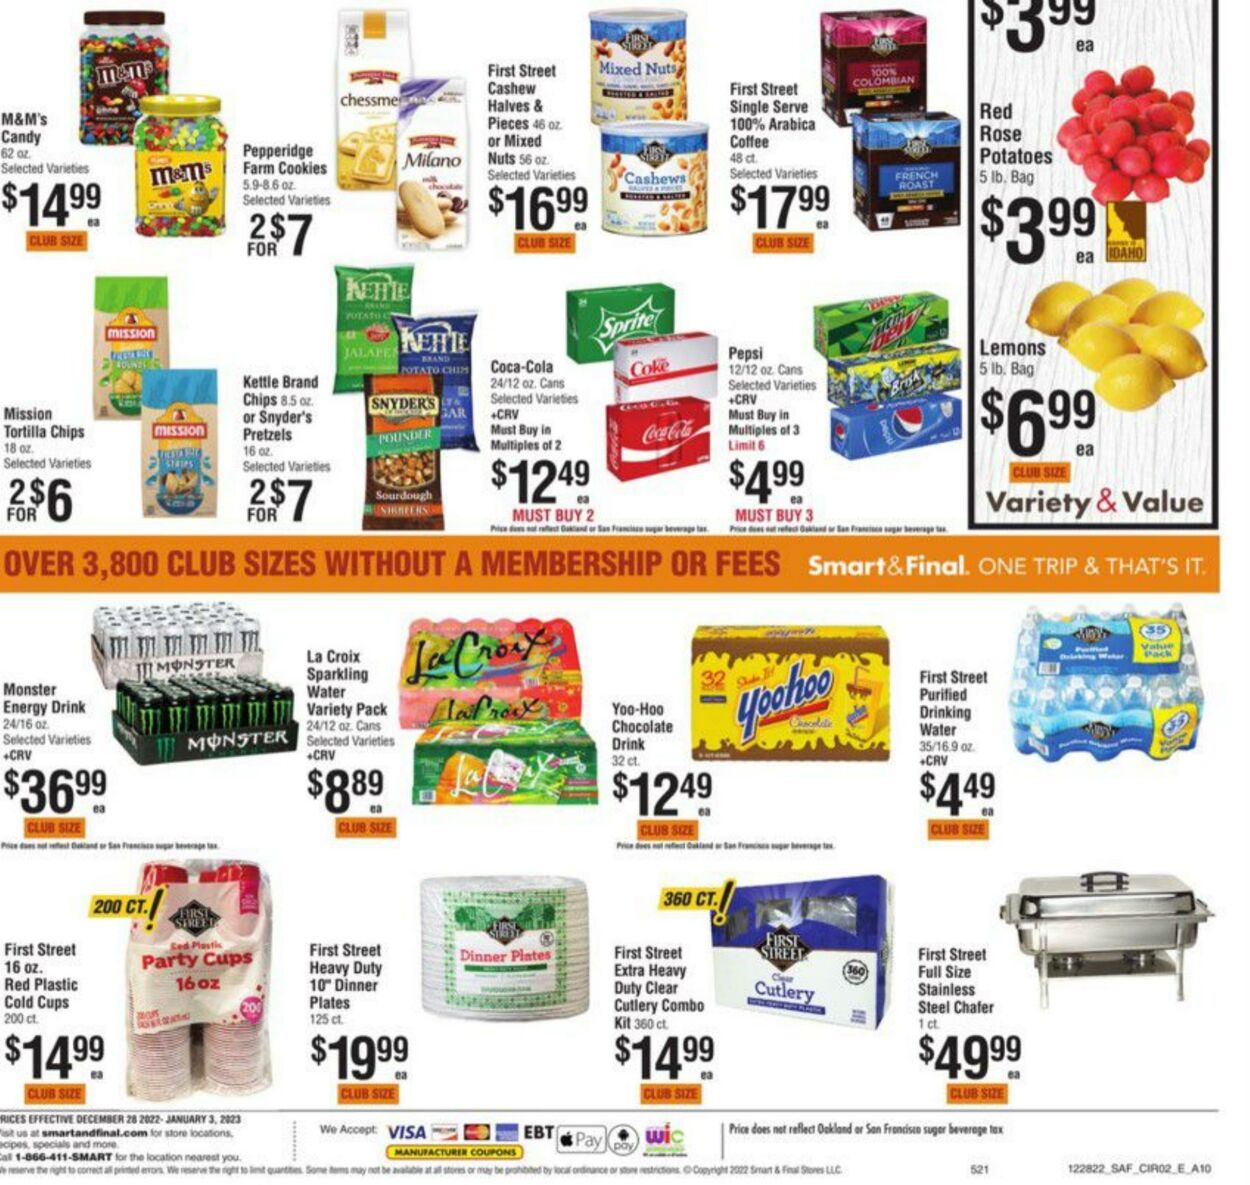 Weekly ad Smart and Final 12/28/2022 - 01/03/2023